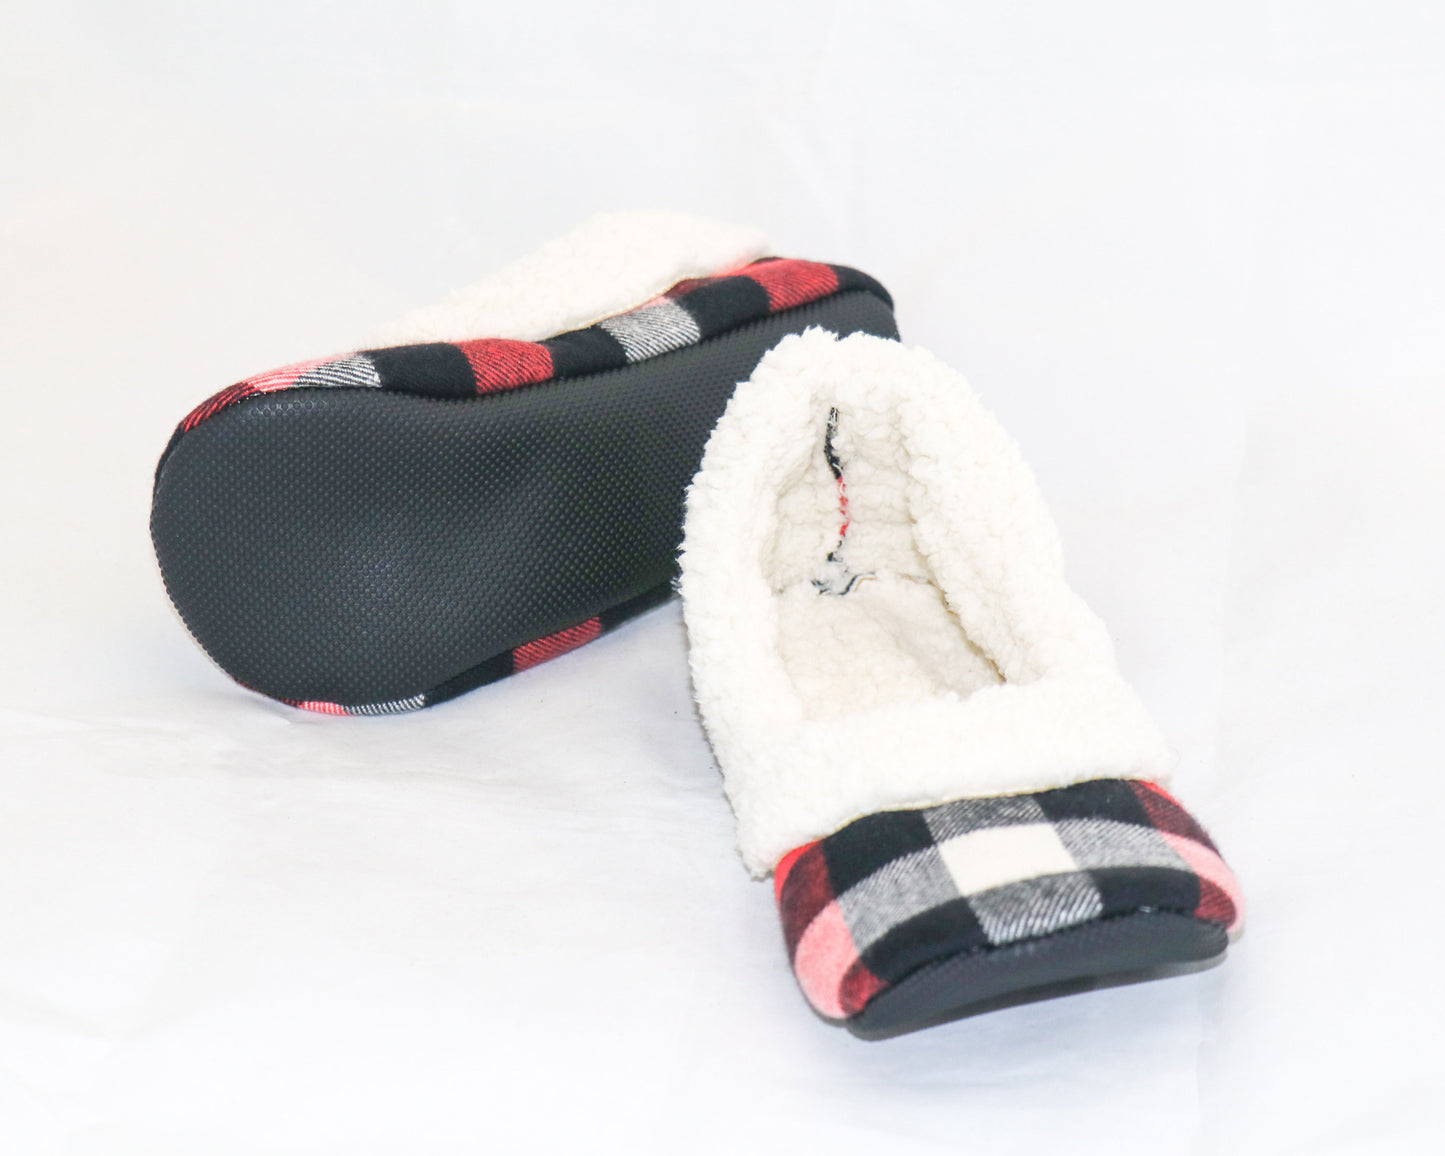 red and black flannel slippers with cream sherpa inside and black neoprene soles